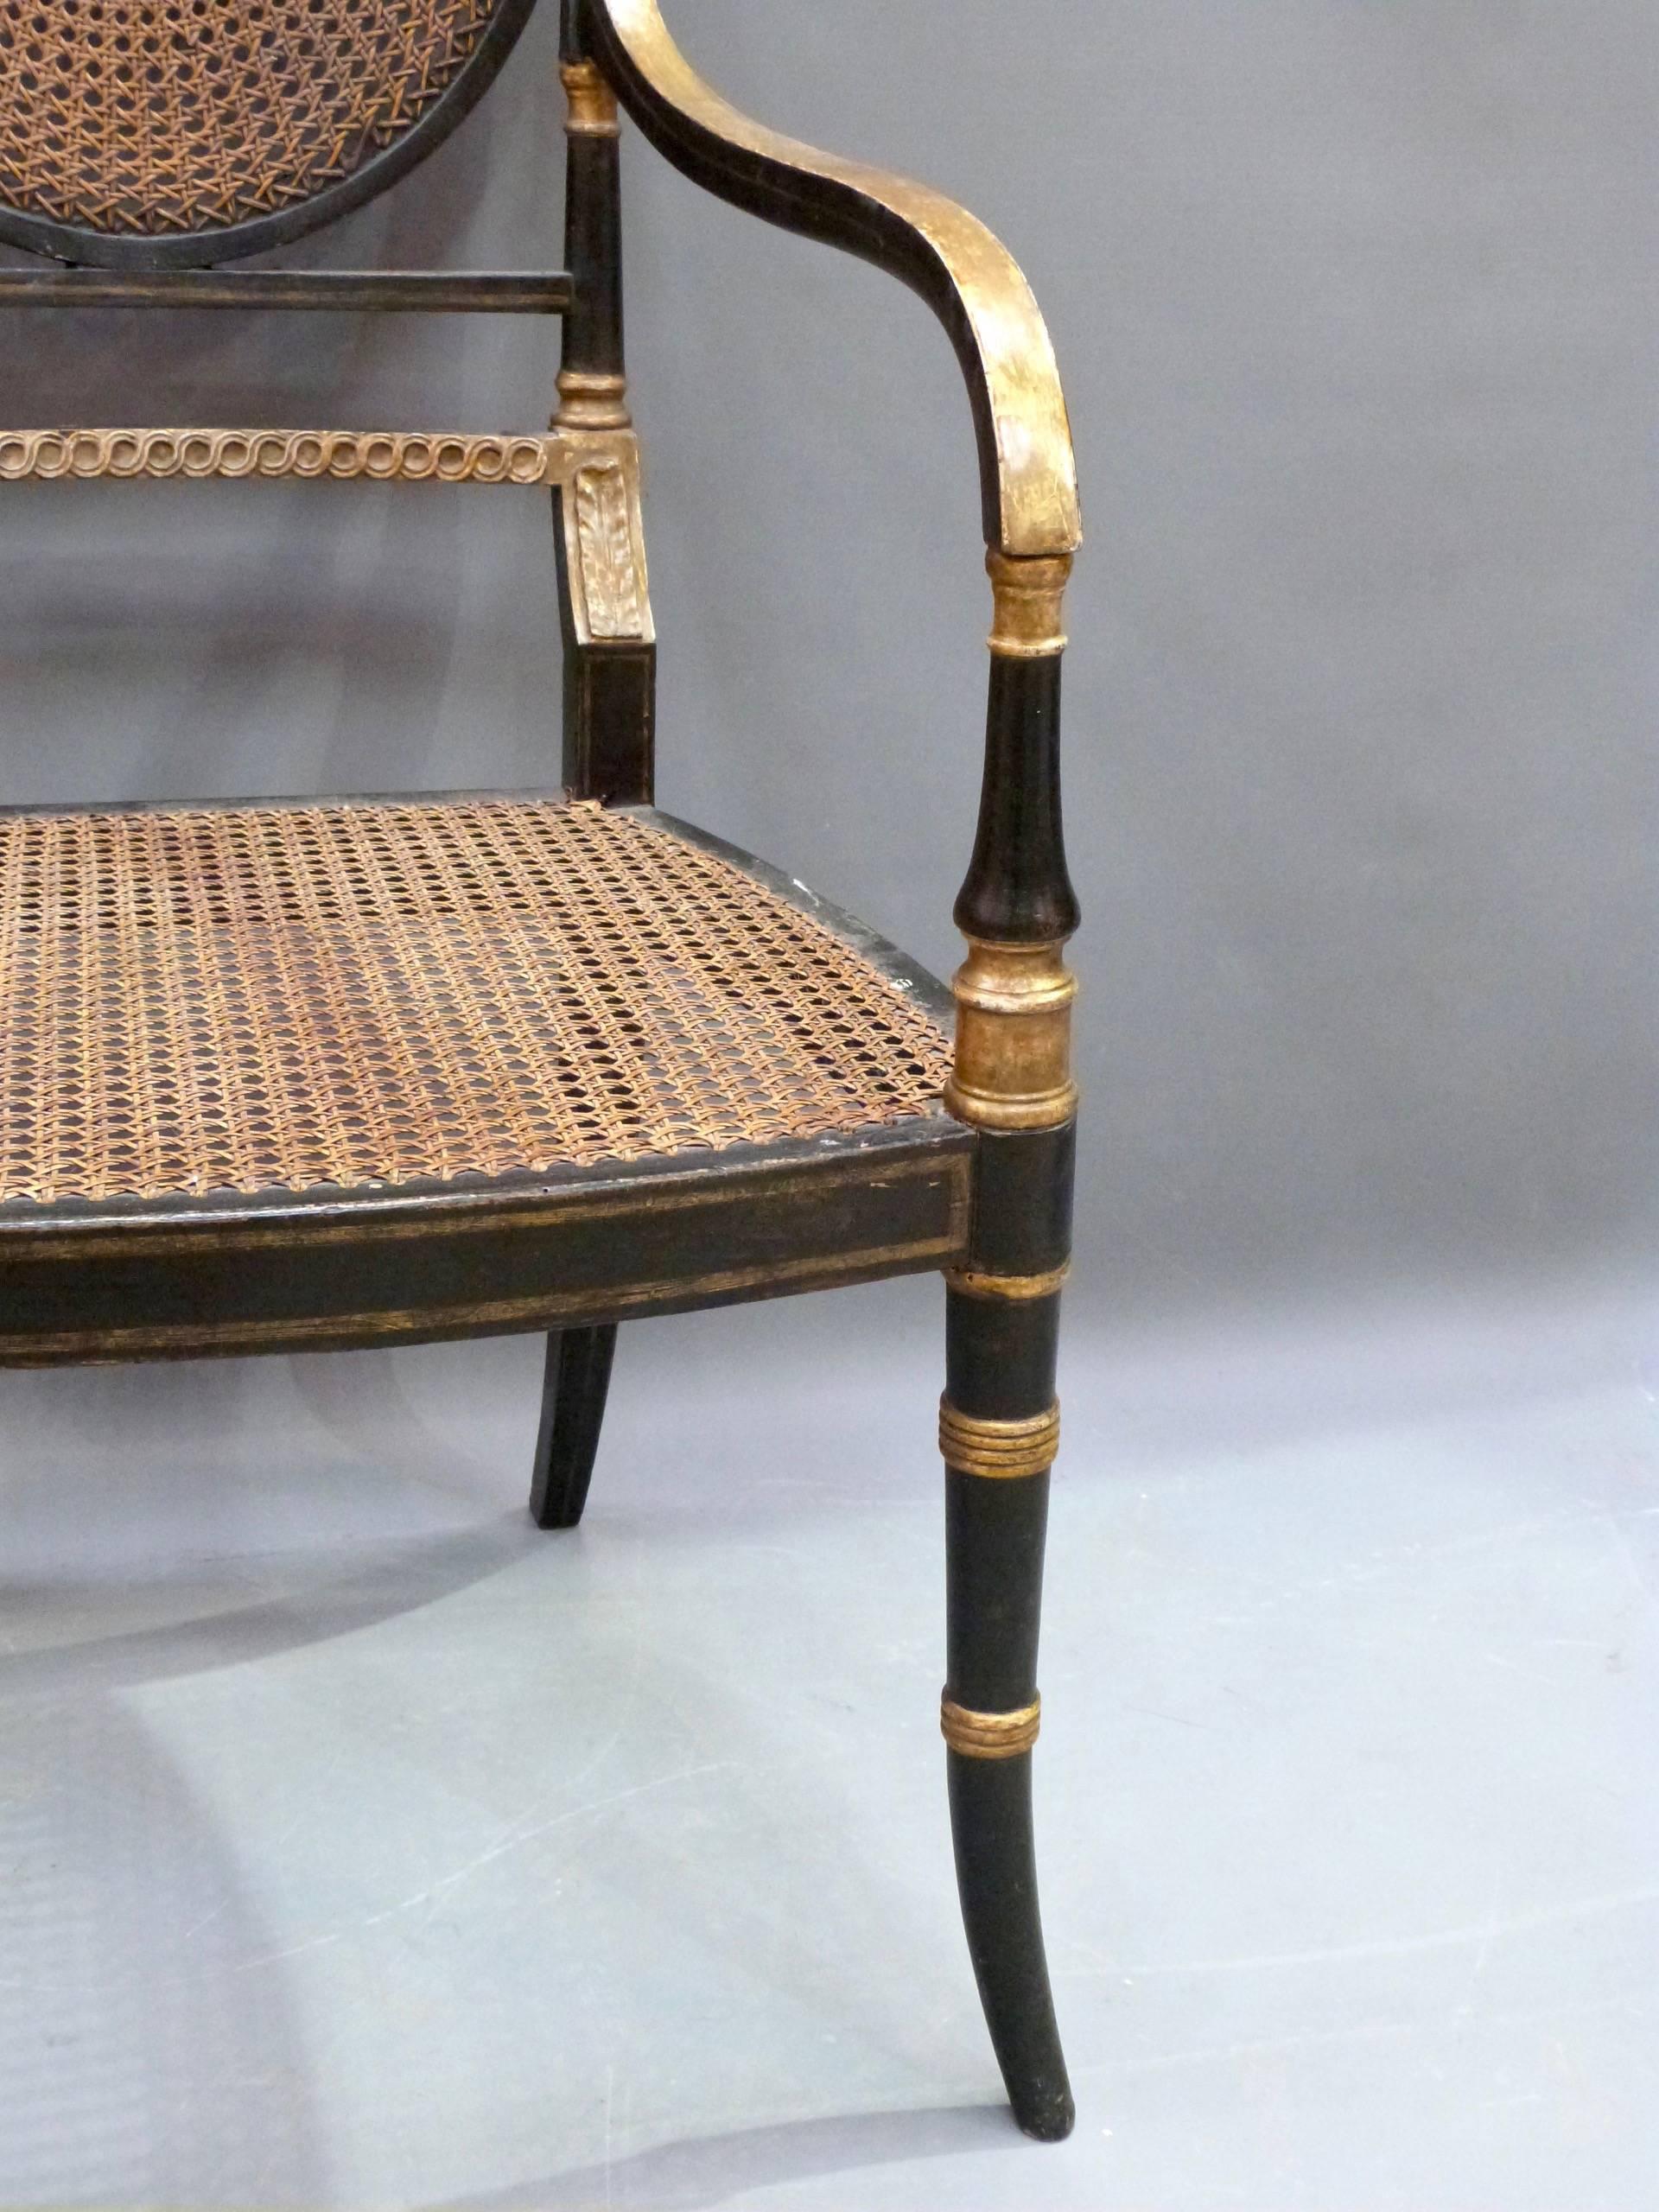 Pair Regency Ebonised Carver Chairs In Good Condition For Sale In Froxfield, Wiltshire